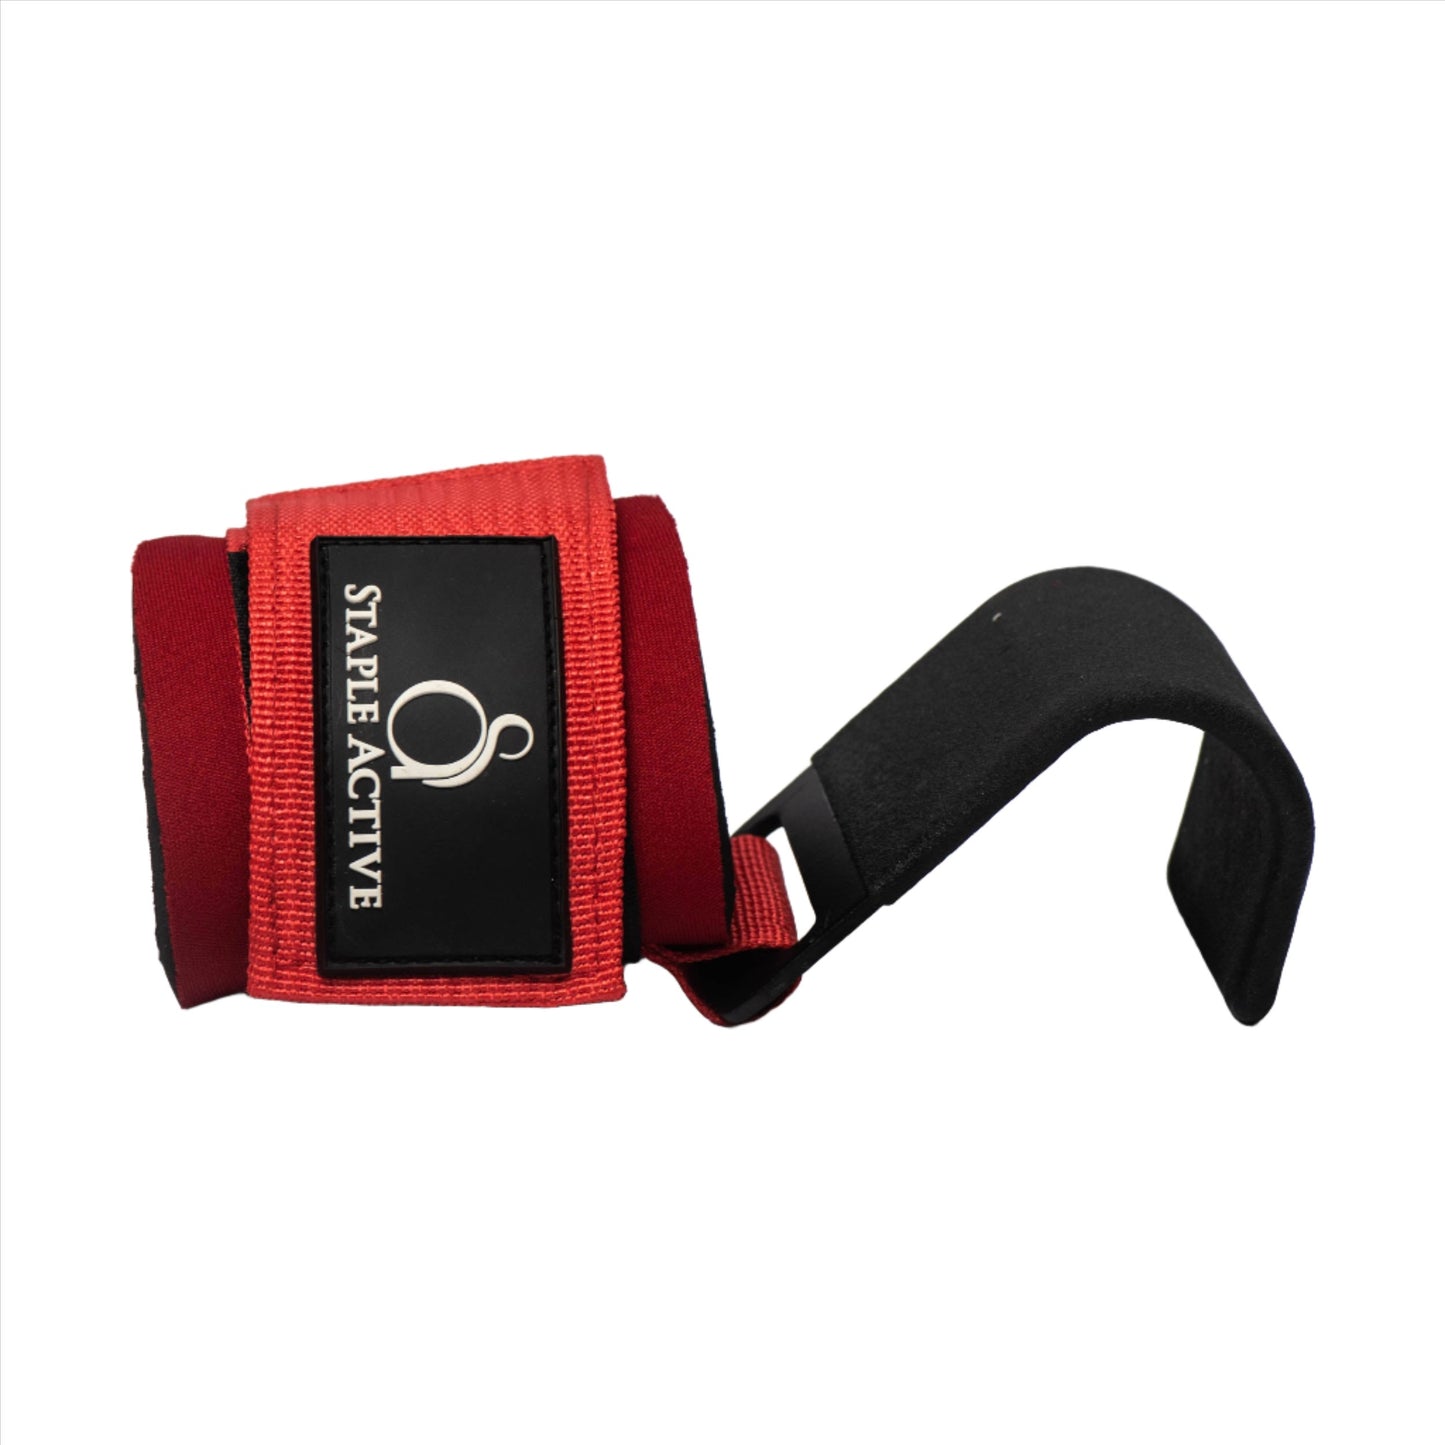 Hook Lifting Grips (Red) - StapleActive